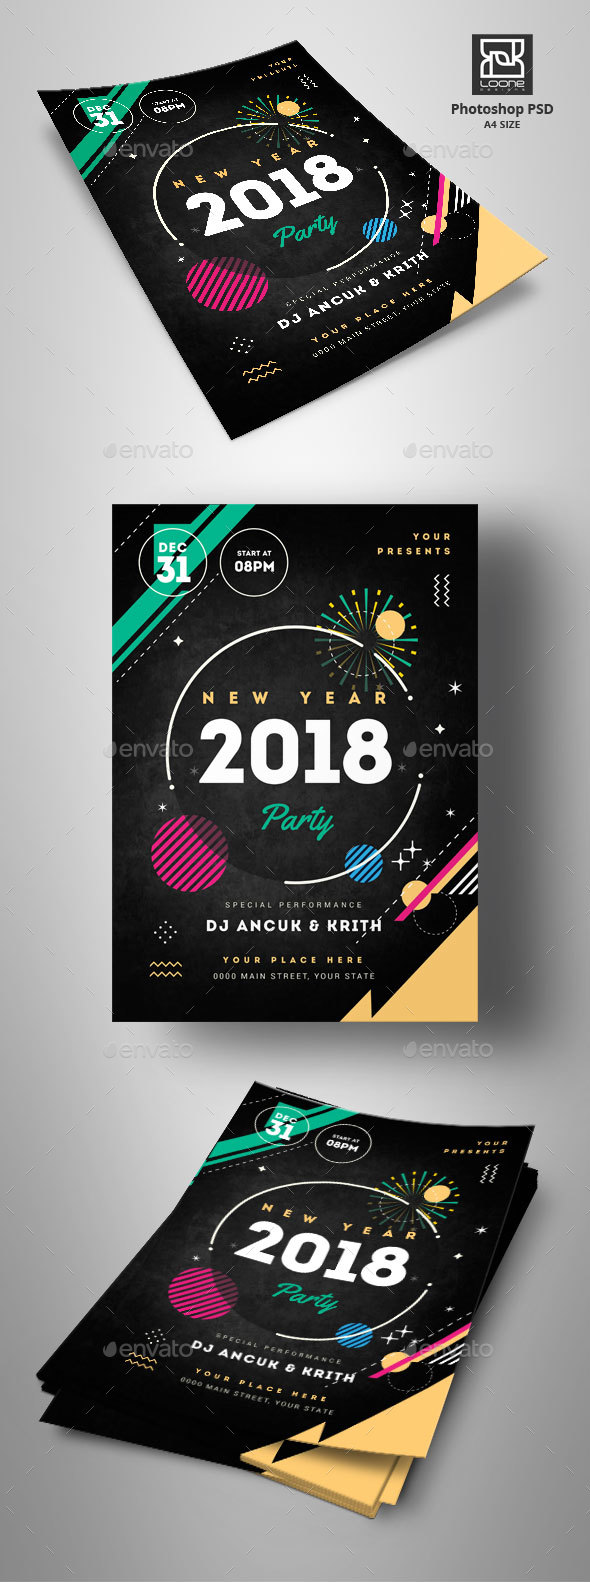 GraphicRiver New Year Party Flyer 21026097